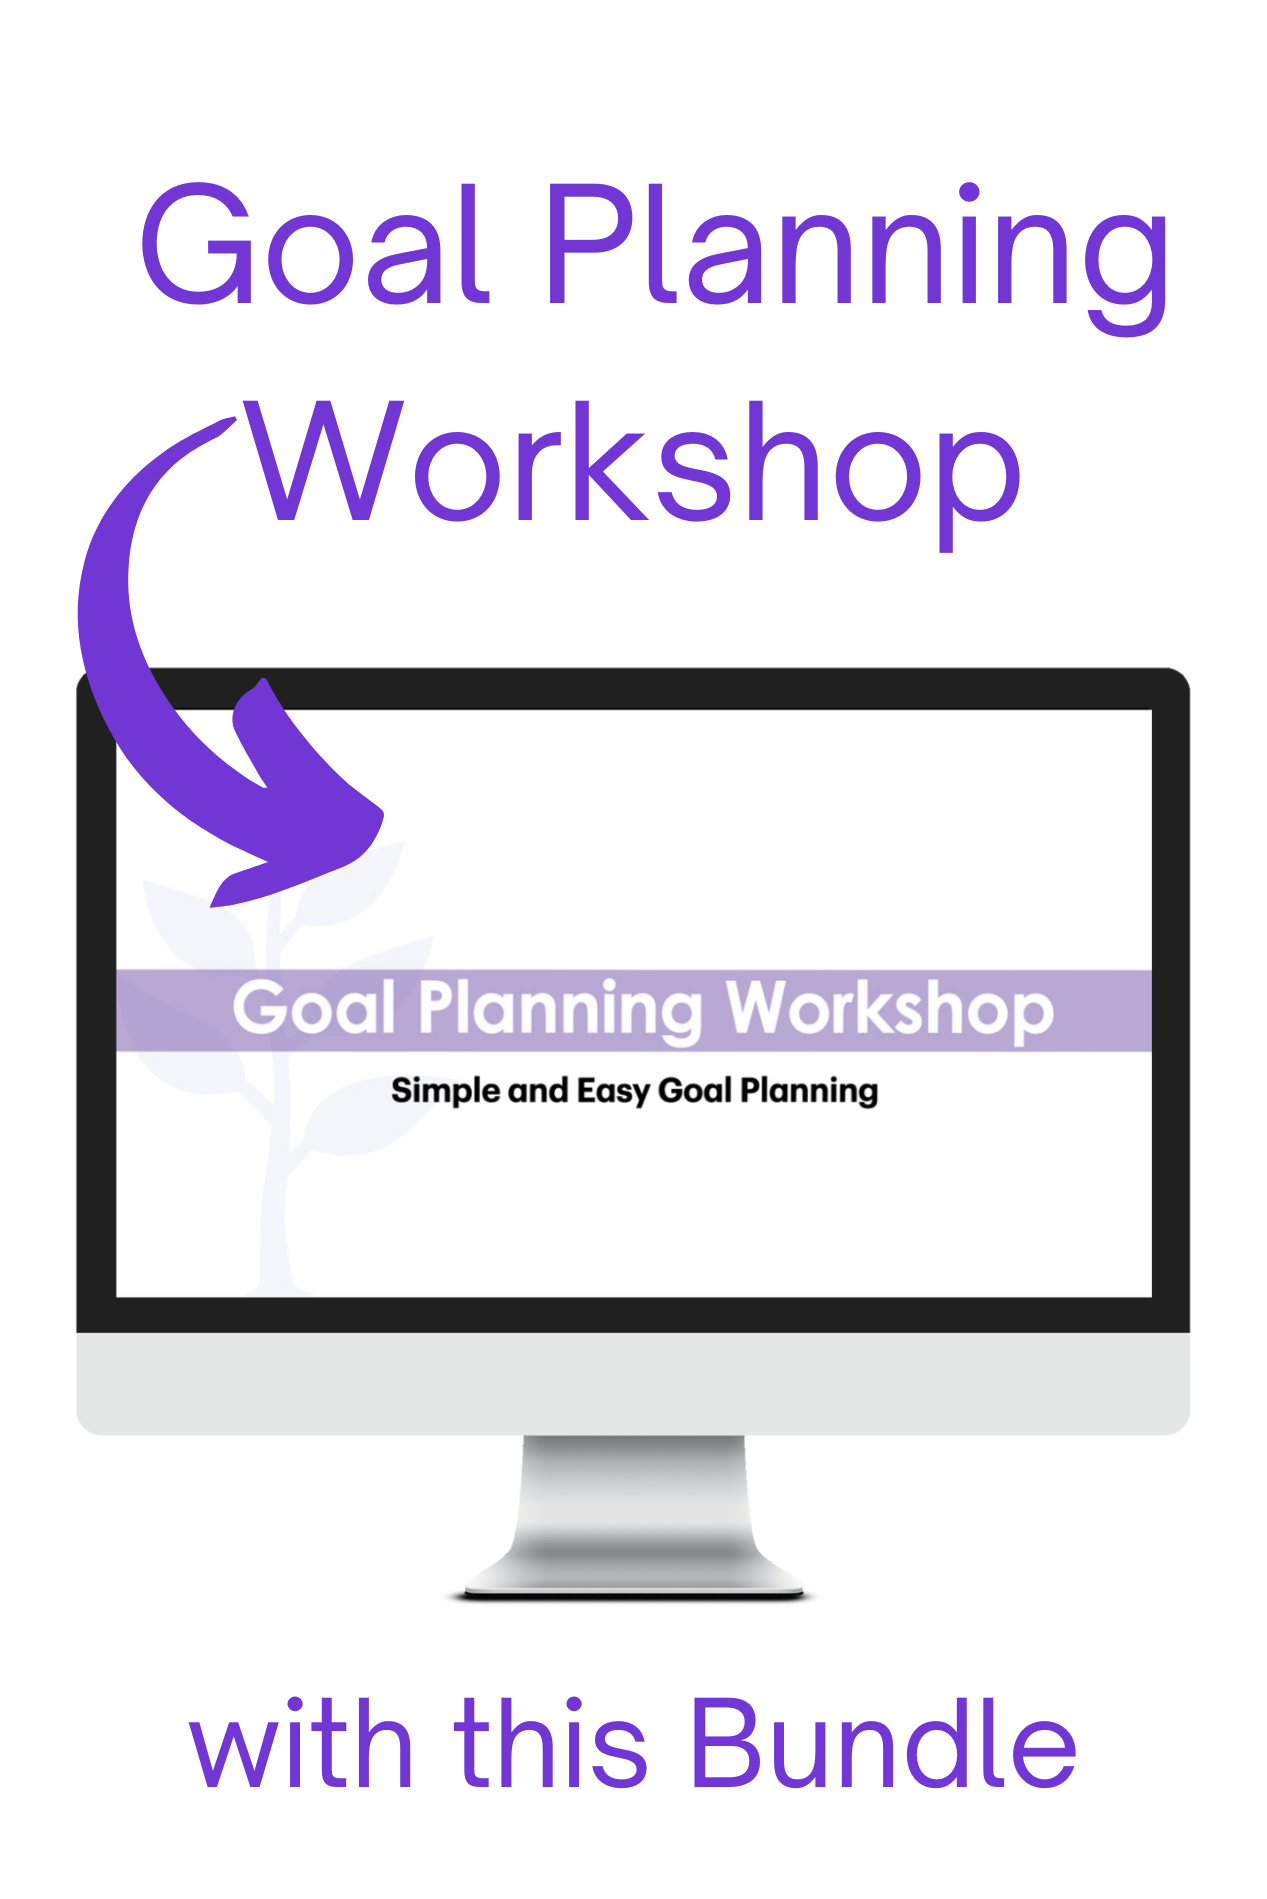 You get the goal planning workshop with the goal planning workbook all for one low price. 